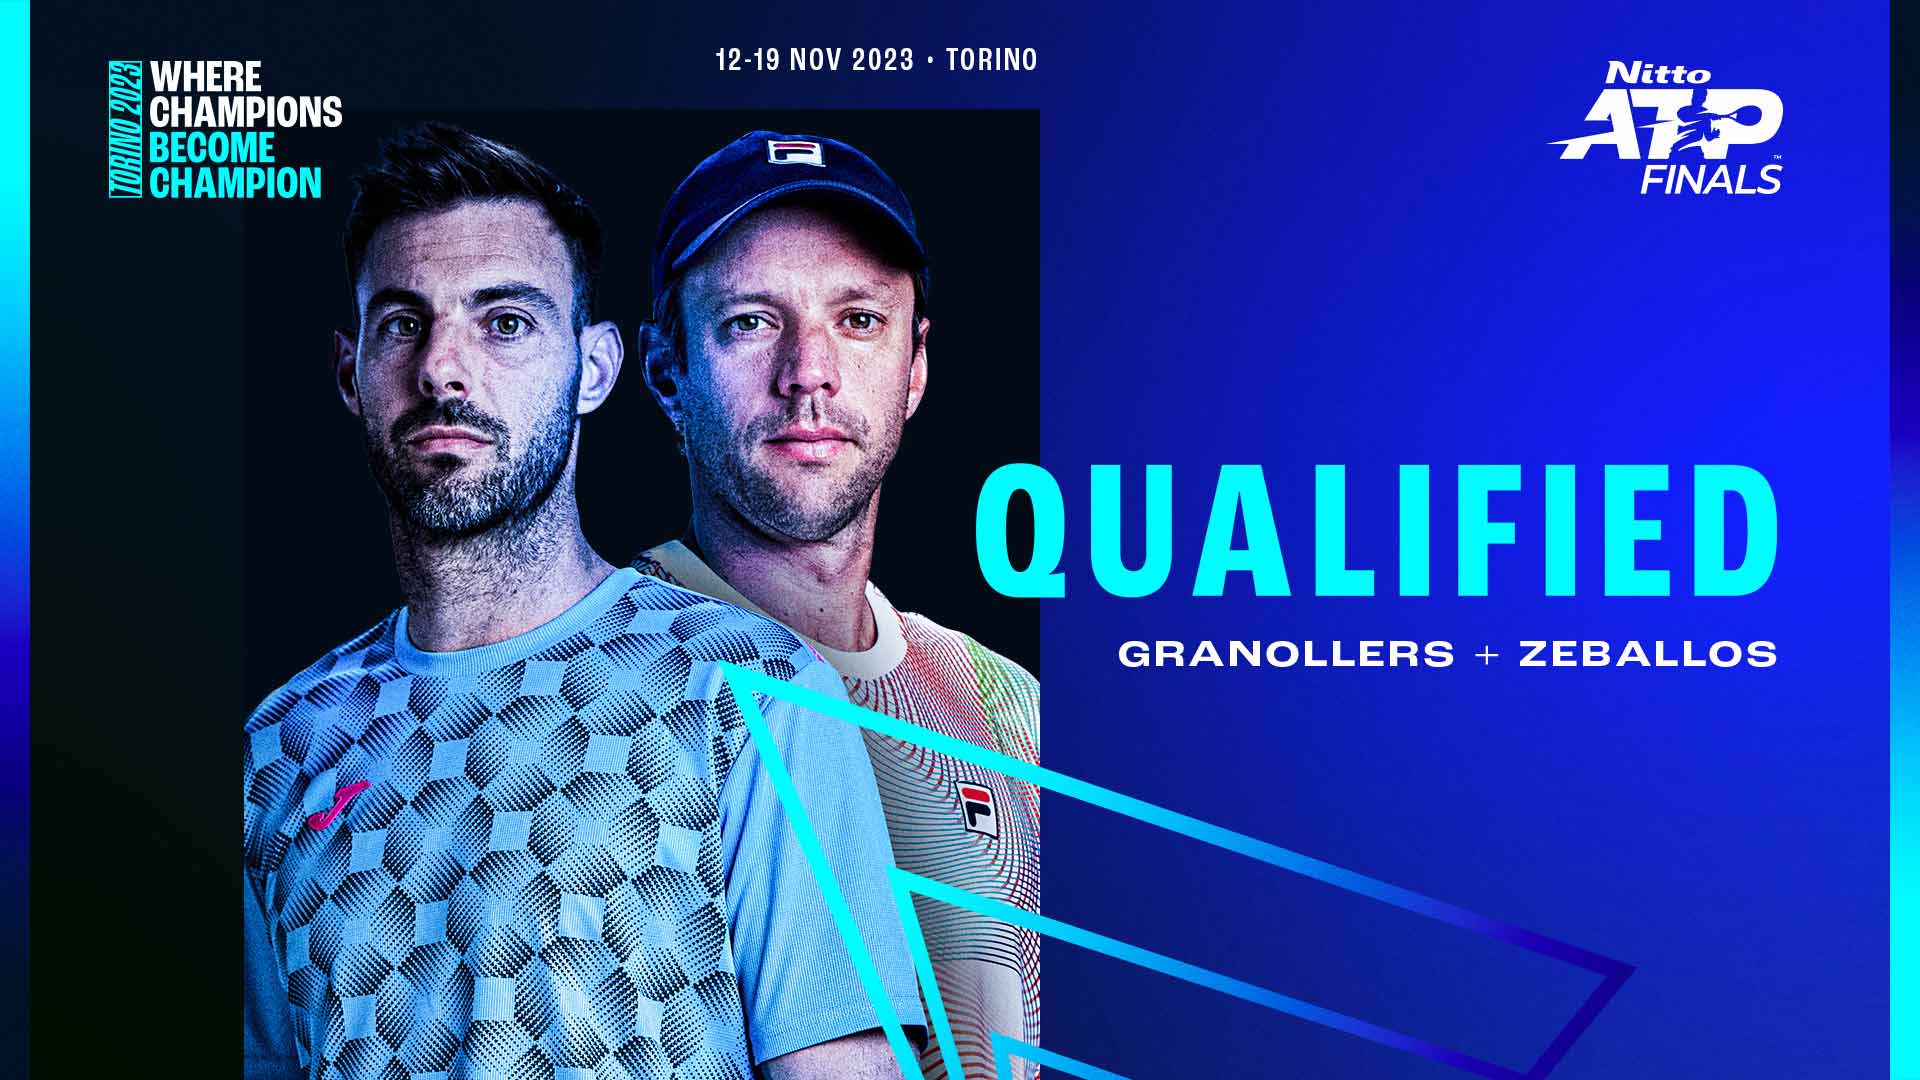 Marcel Granollers and Horacio Zeballos are the fifth doubles team to qualify for the 2023 Nitto ATP Finals.